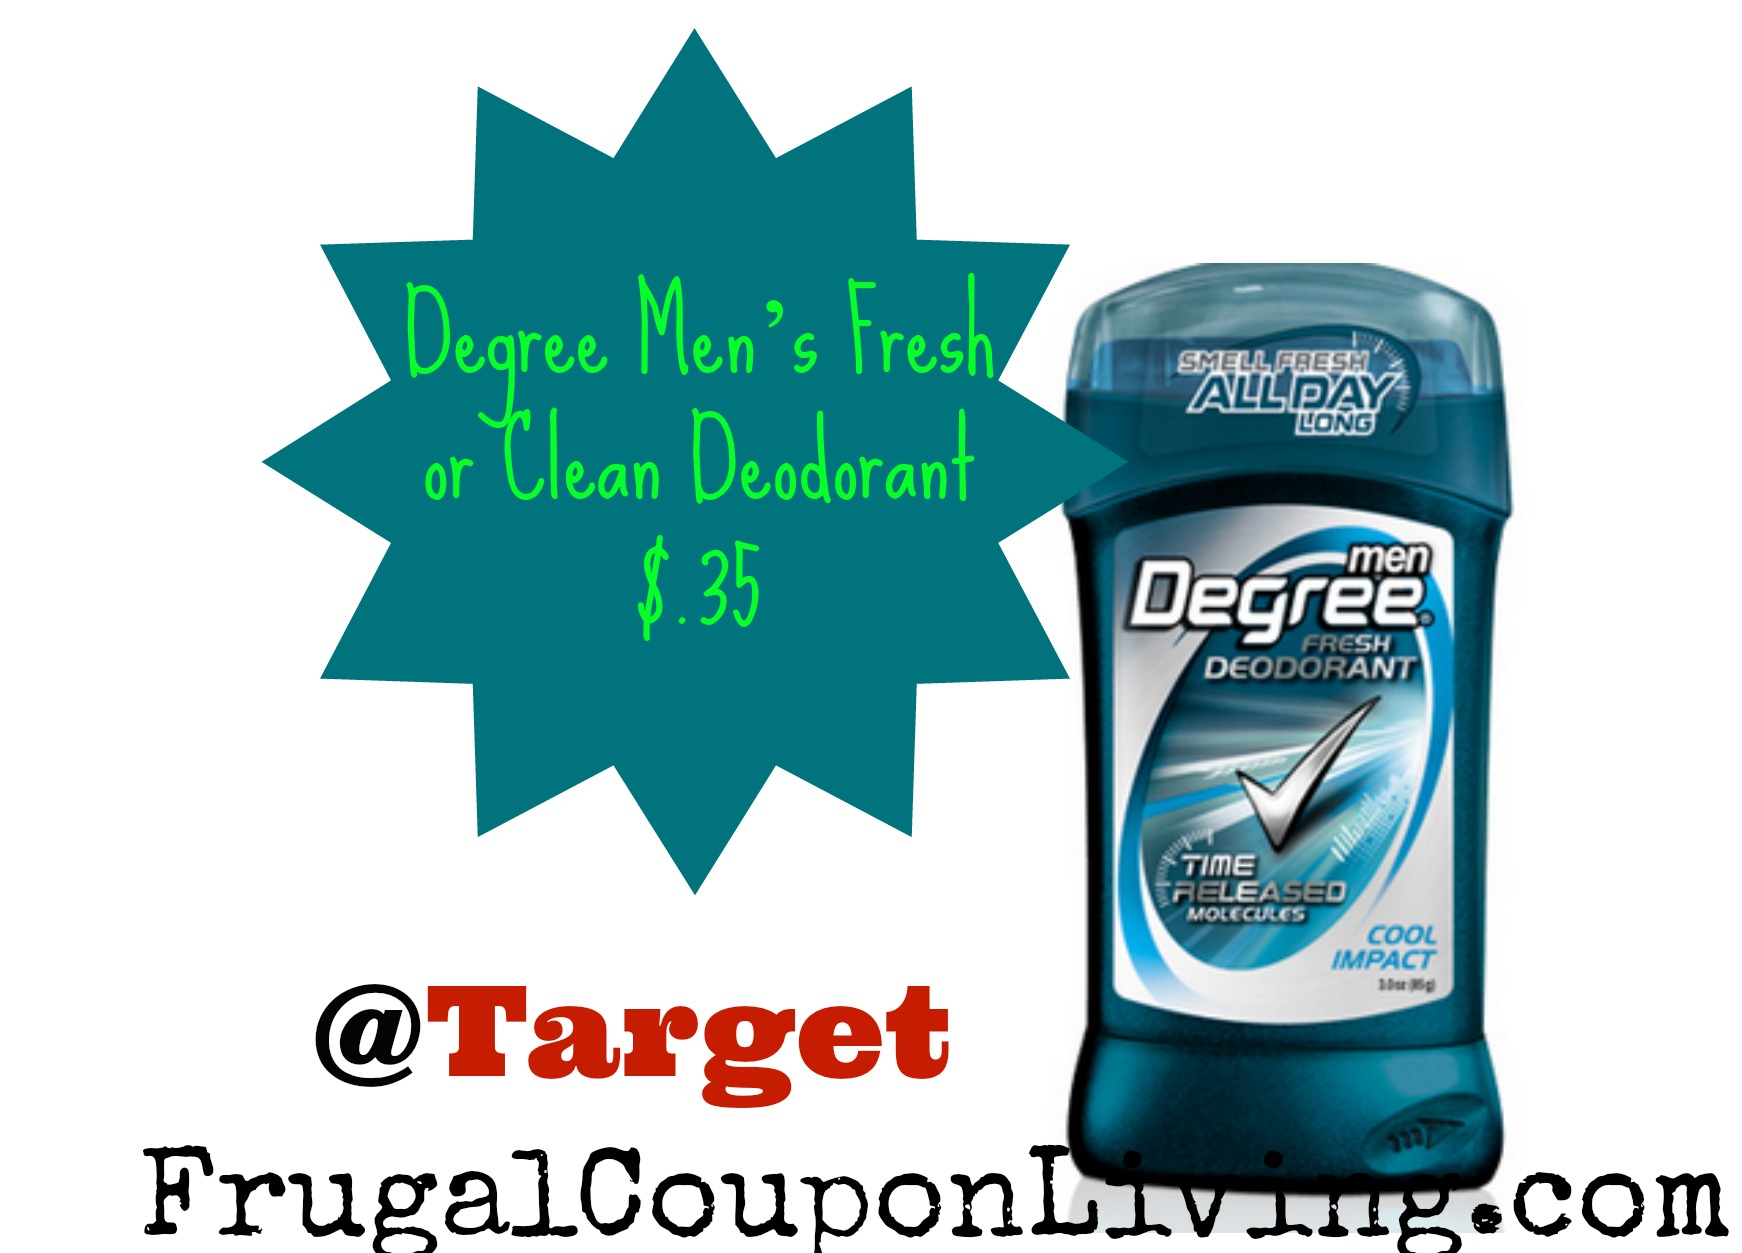 degree-men-coupons-deal-now-35